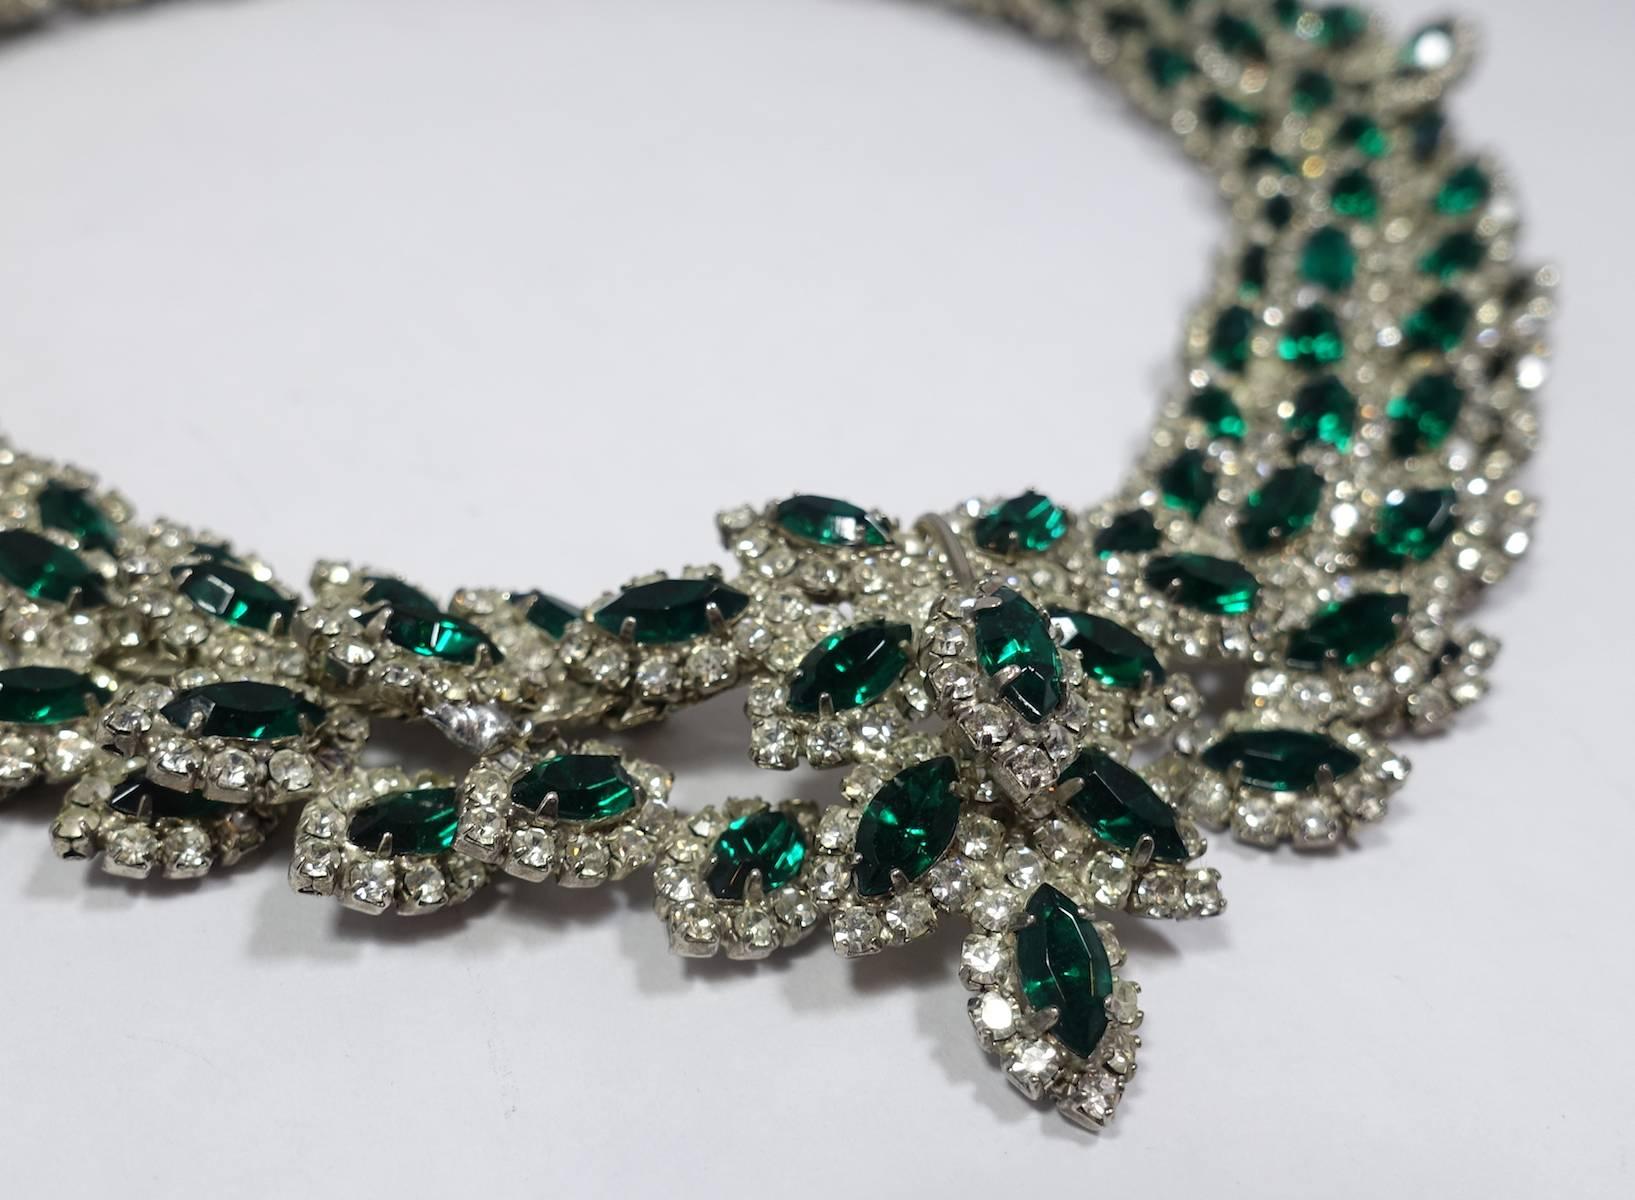 This vintage 1960s Les Bernard necklace features green and clear crystals in a silver tone setting.  The necklace measures 15-1/2” long with a slide in clasp.  The centerpiece has a 3-dimensional design and measures 1-1/2” wide.  This vintage